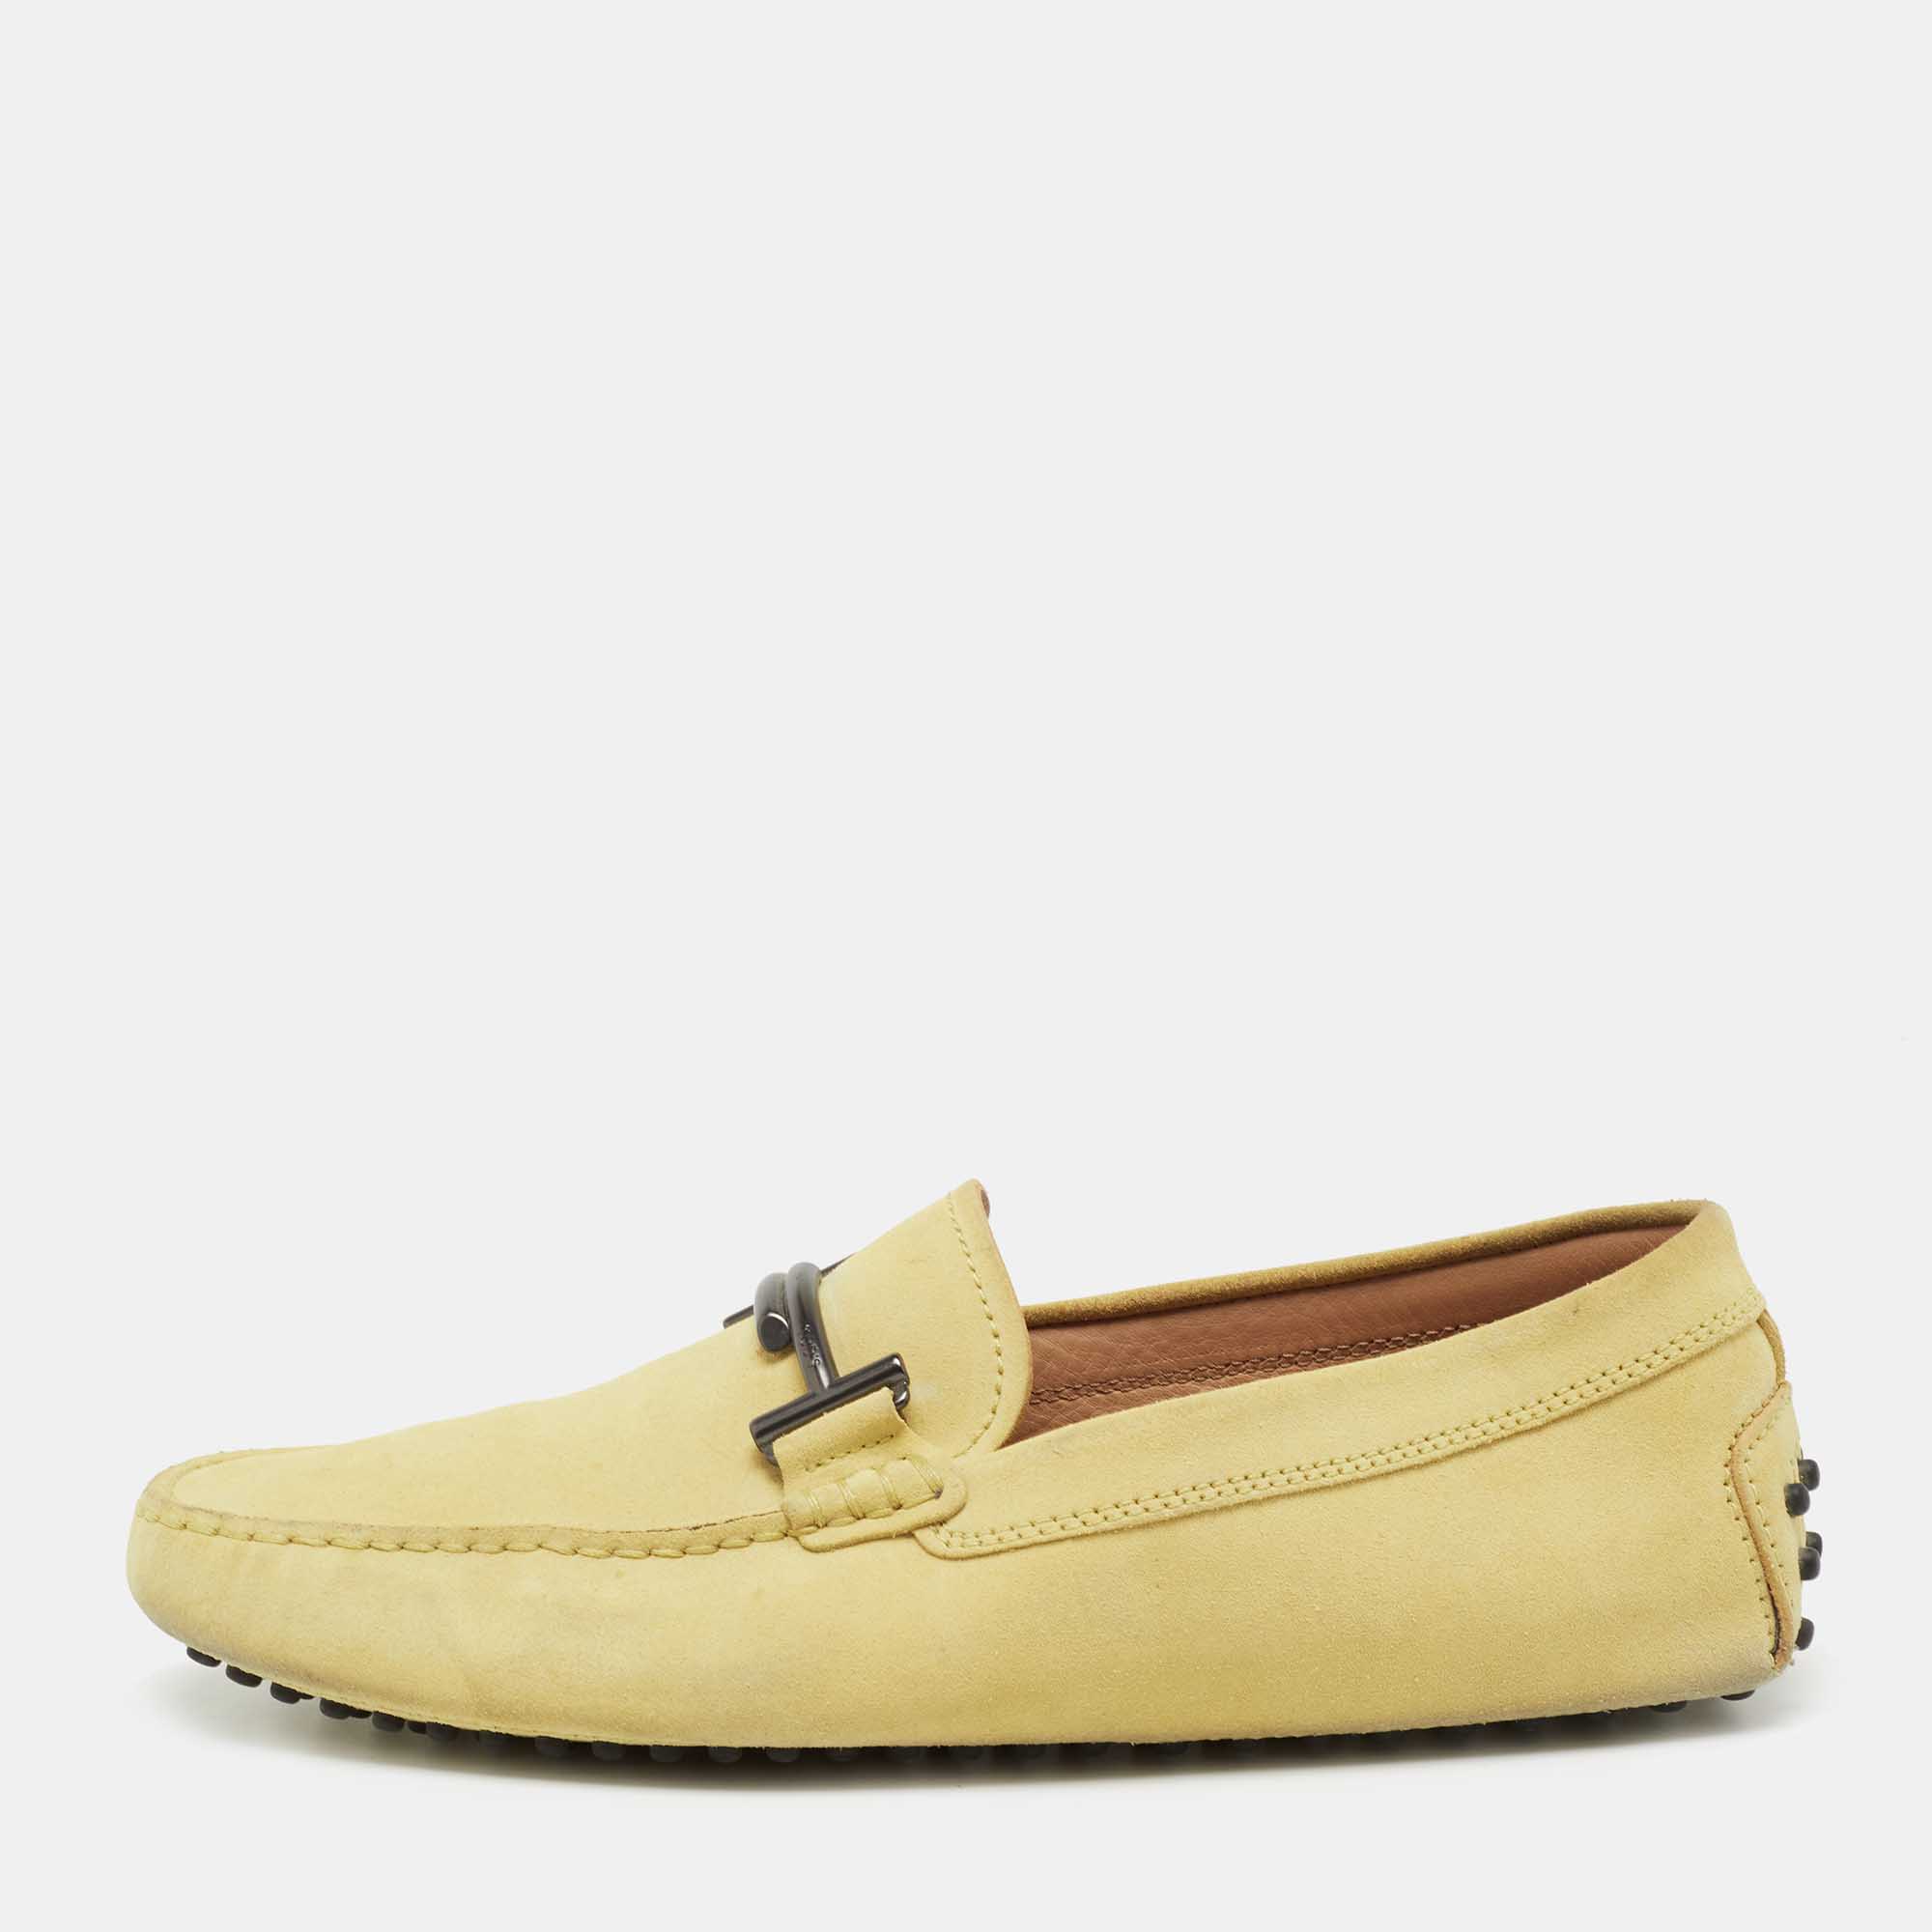 Tods Yellow Suede Gommino Double T Driving Loafers Size 39.5 Tod's